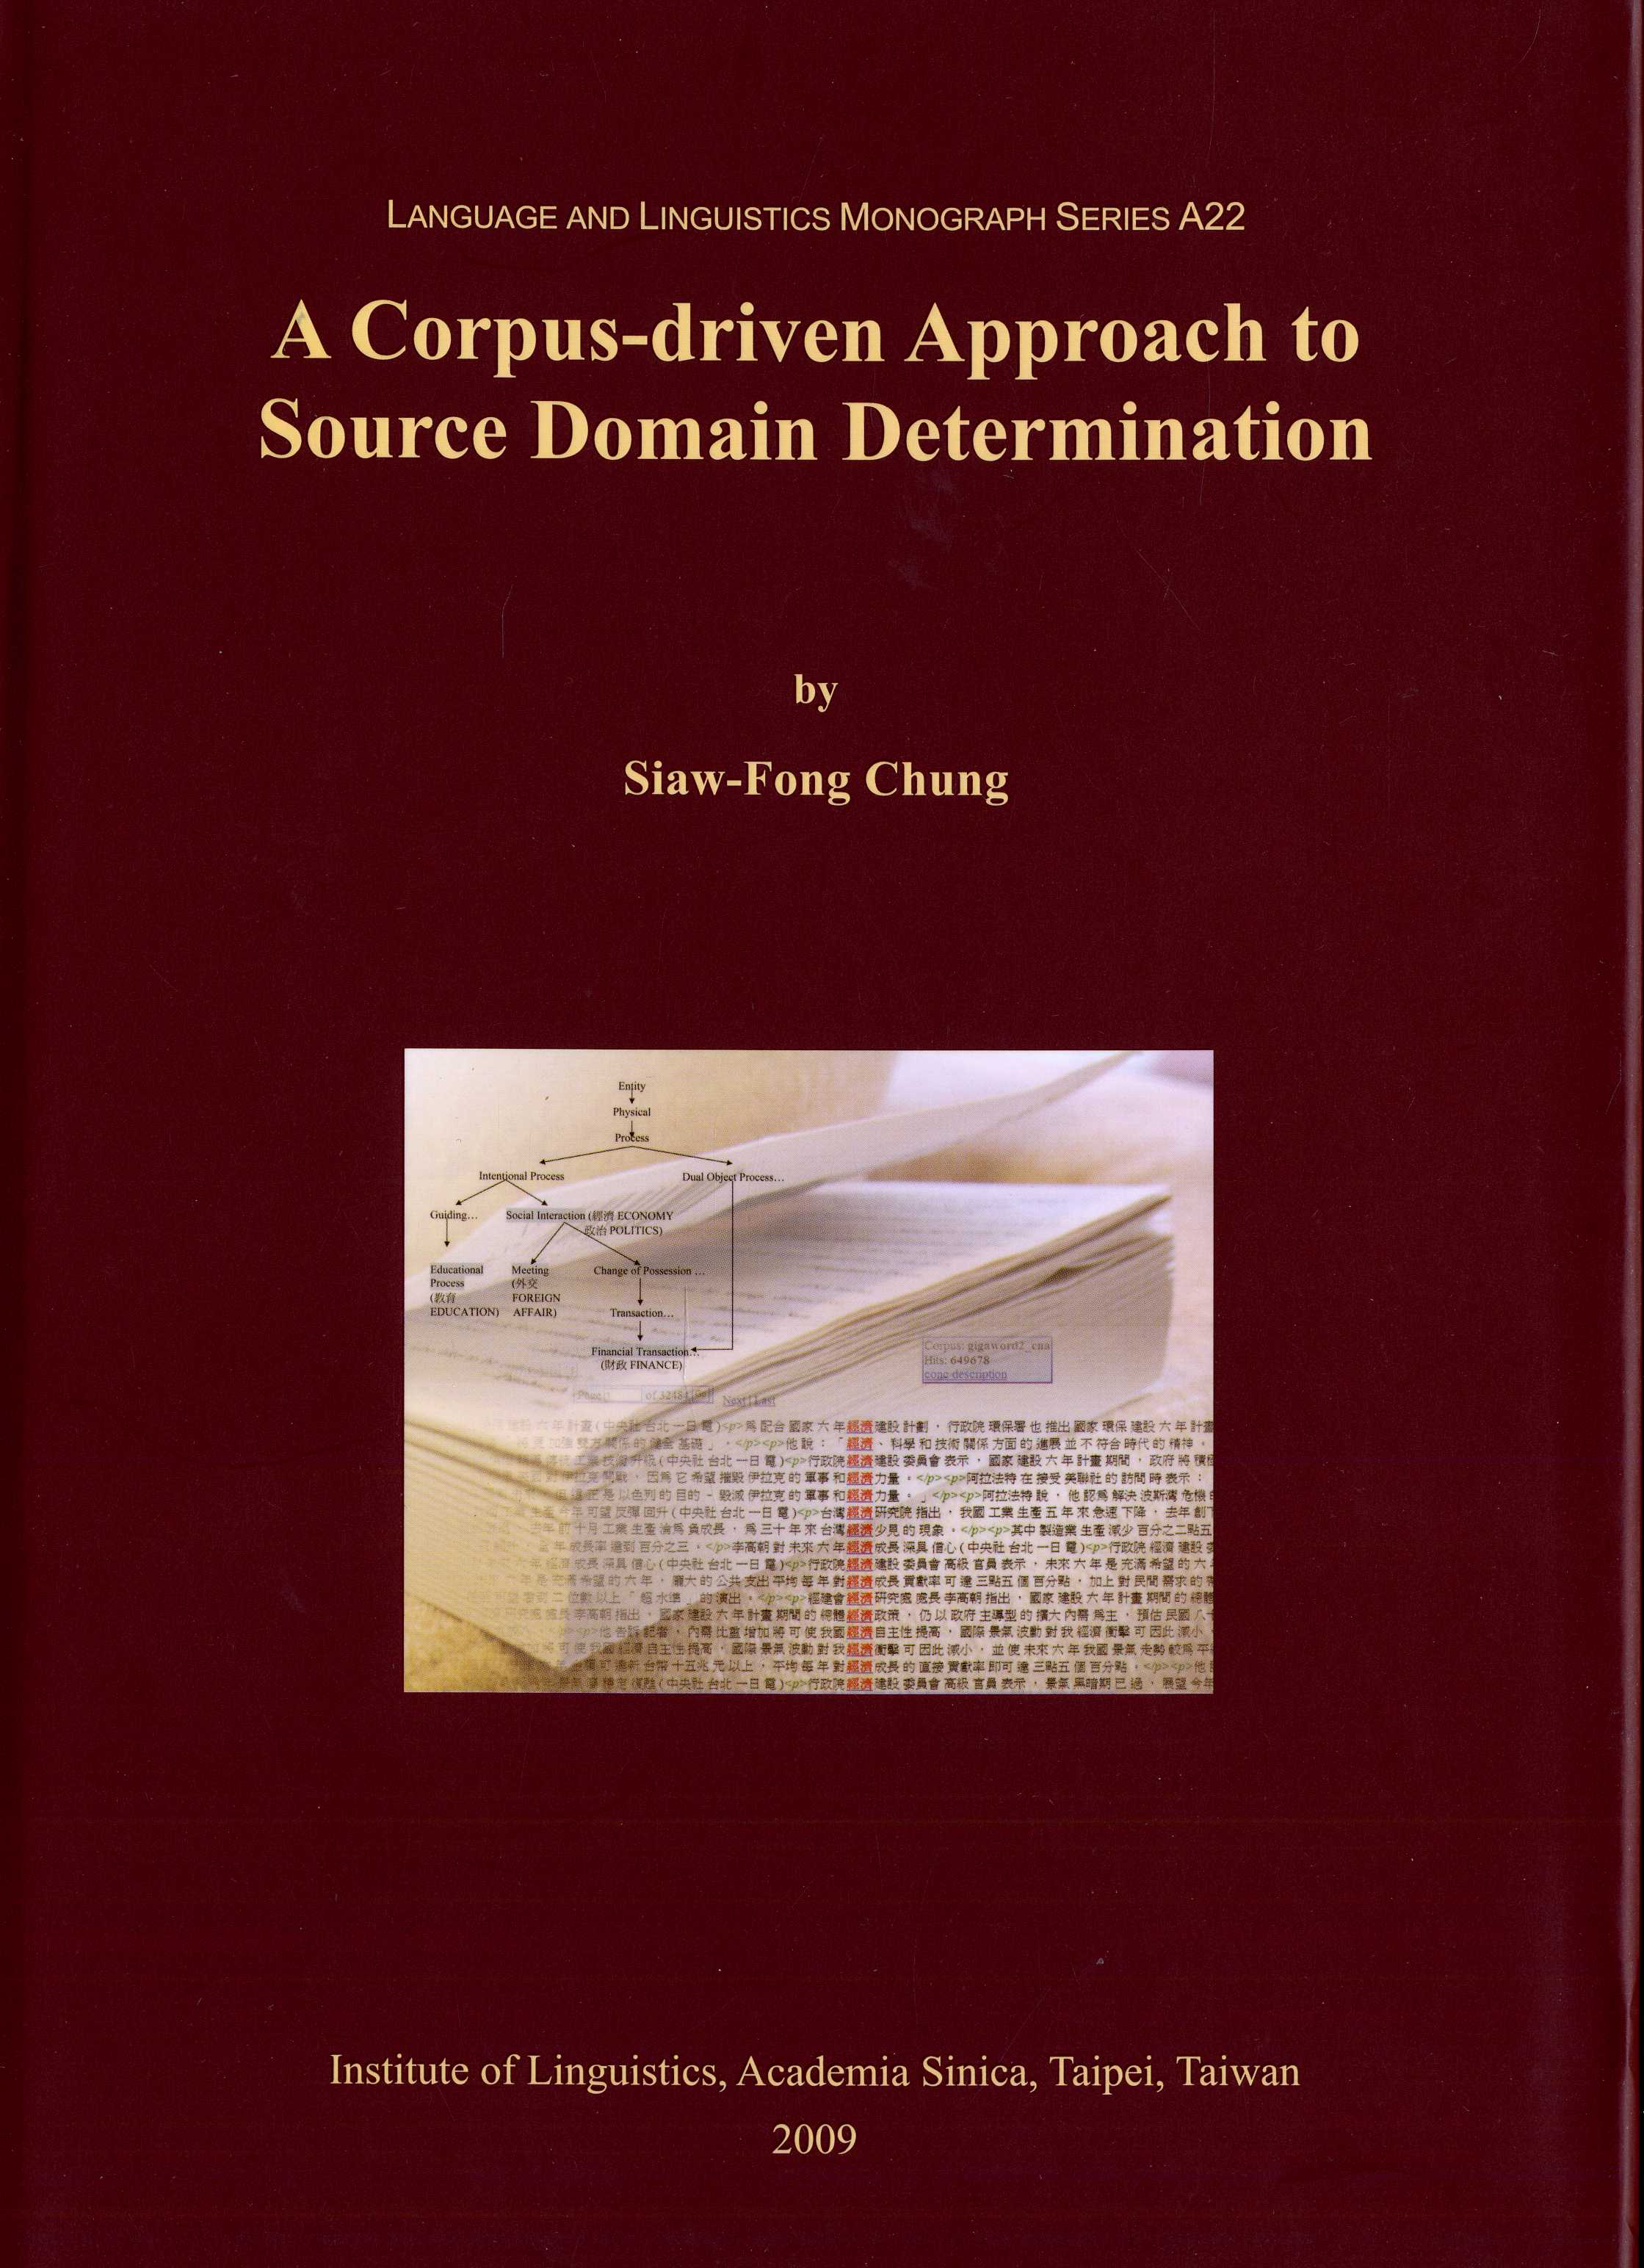 A Corpus-driven Approach to Source Domain Determination